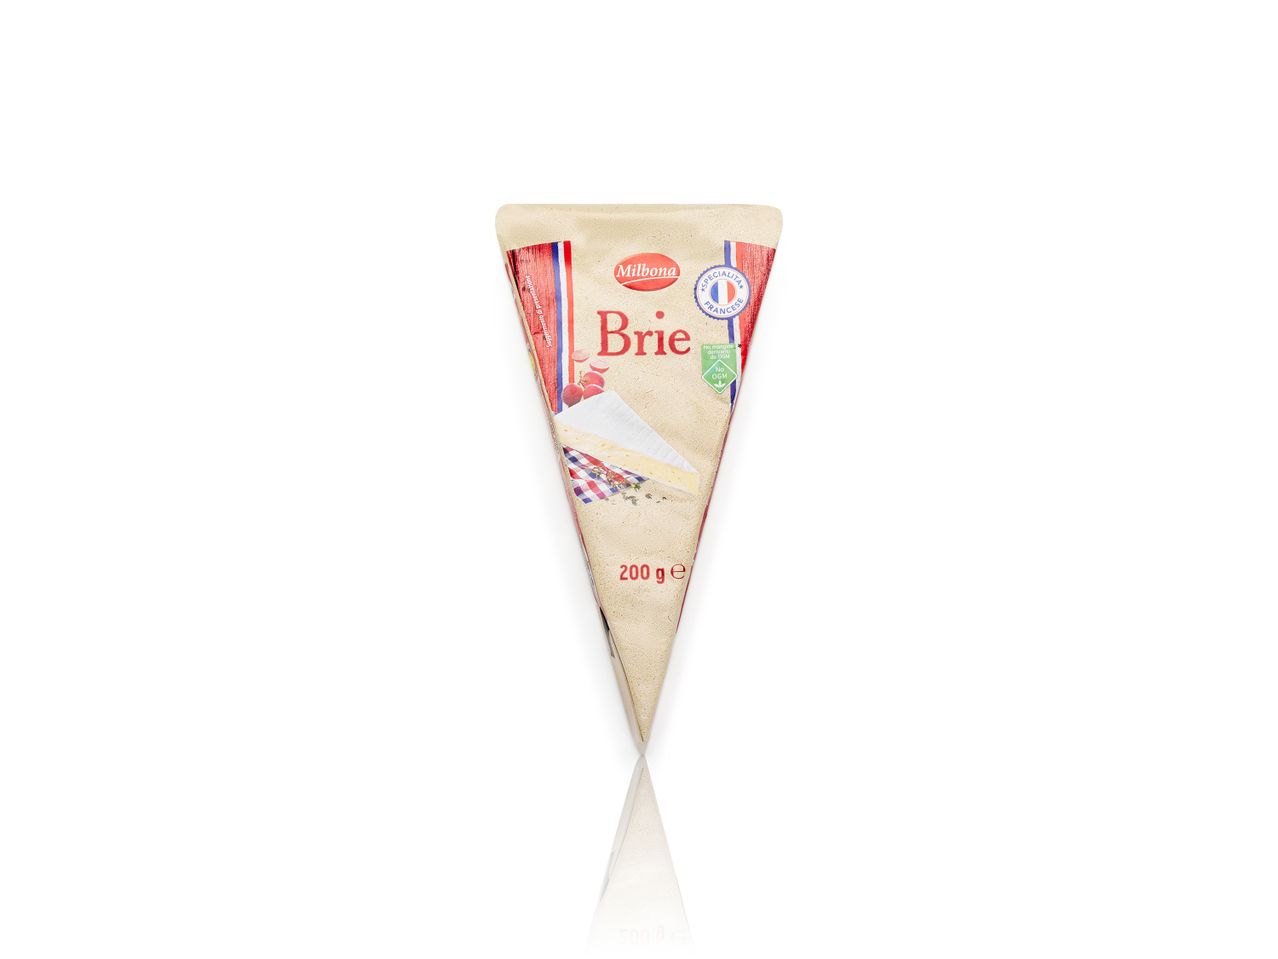 Go to full screen view: French Brie - Image 1